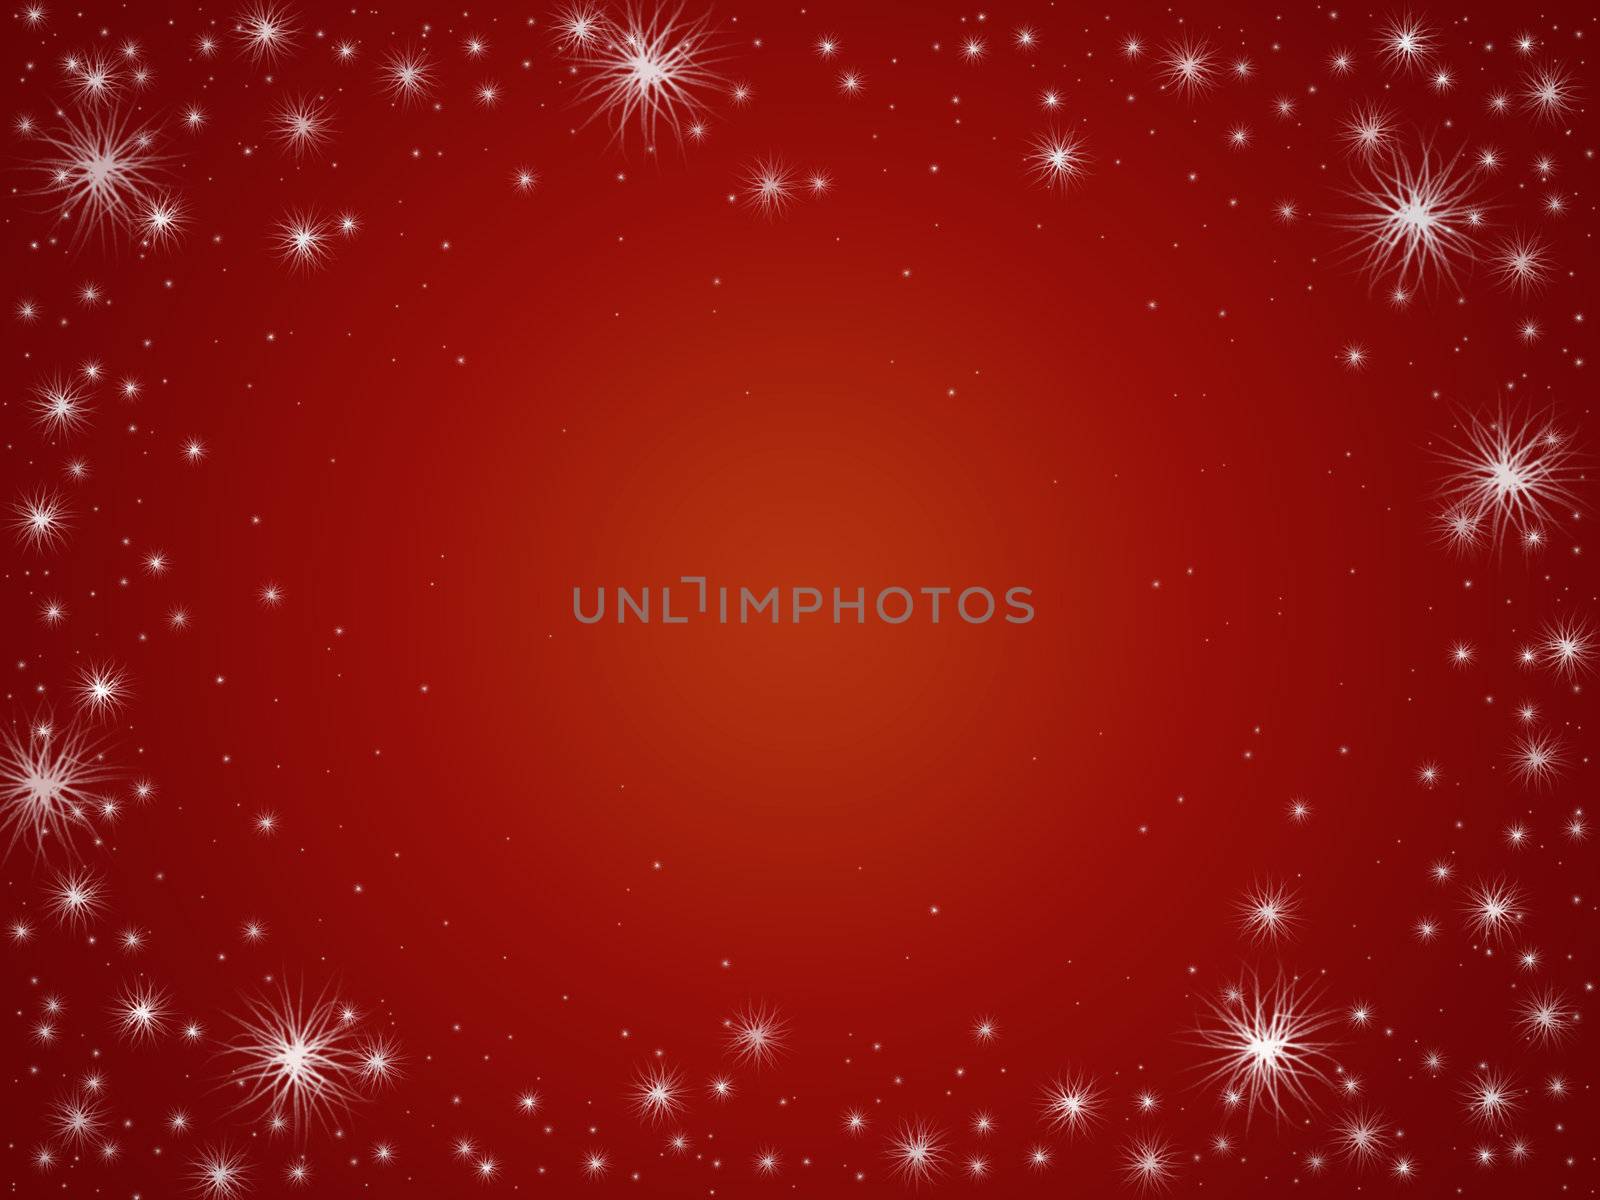 white stars over red background with feather center
